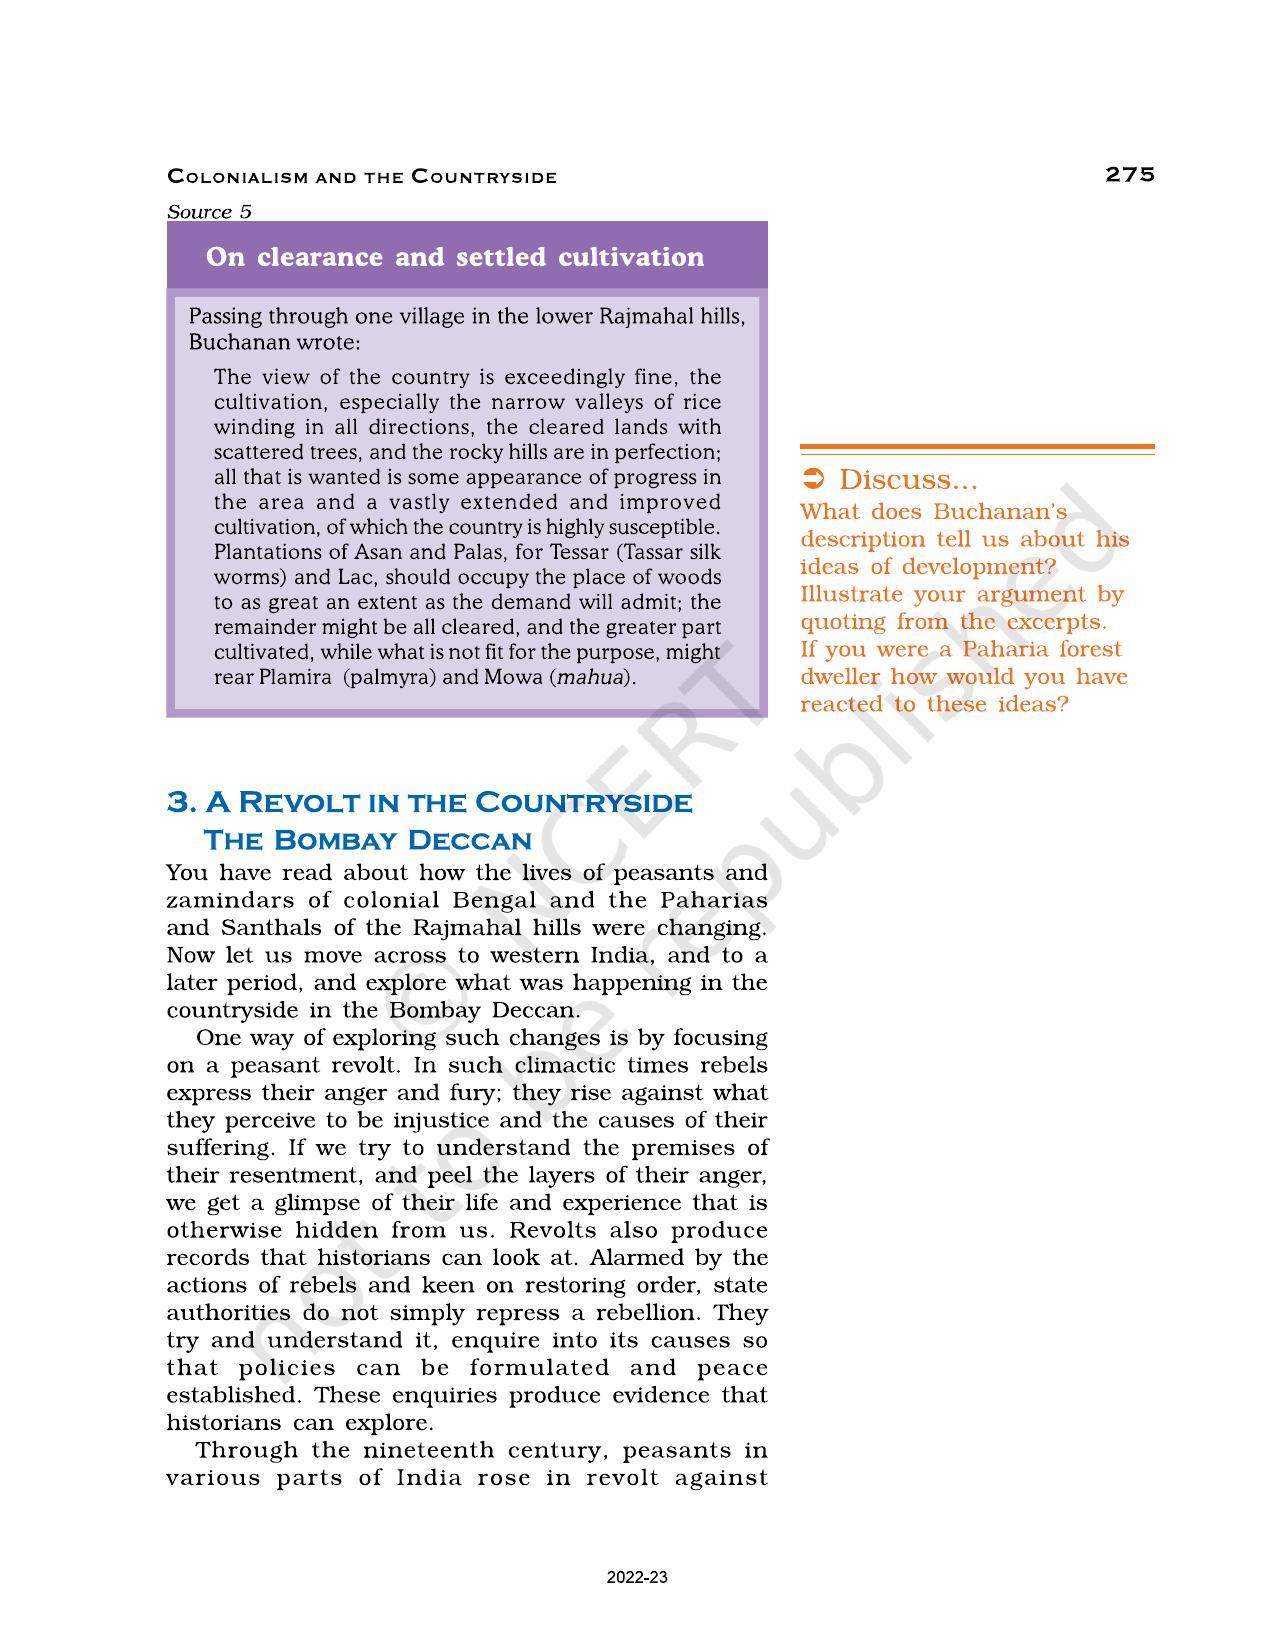 NCERT Book for Class 12 History (Part-II) Chapter 10 Colonialism and the Countryside - Page 19